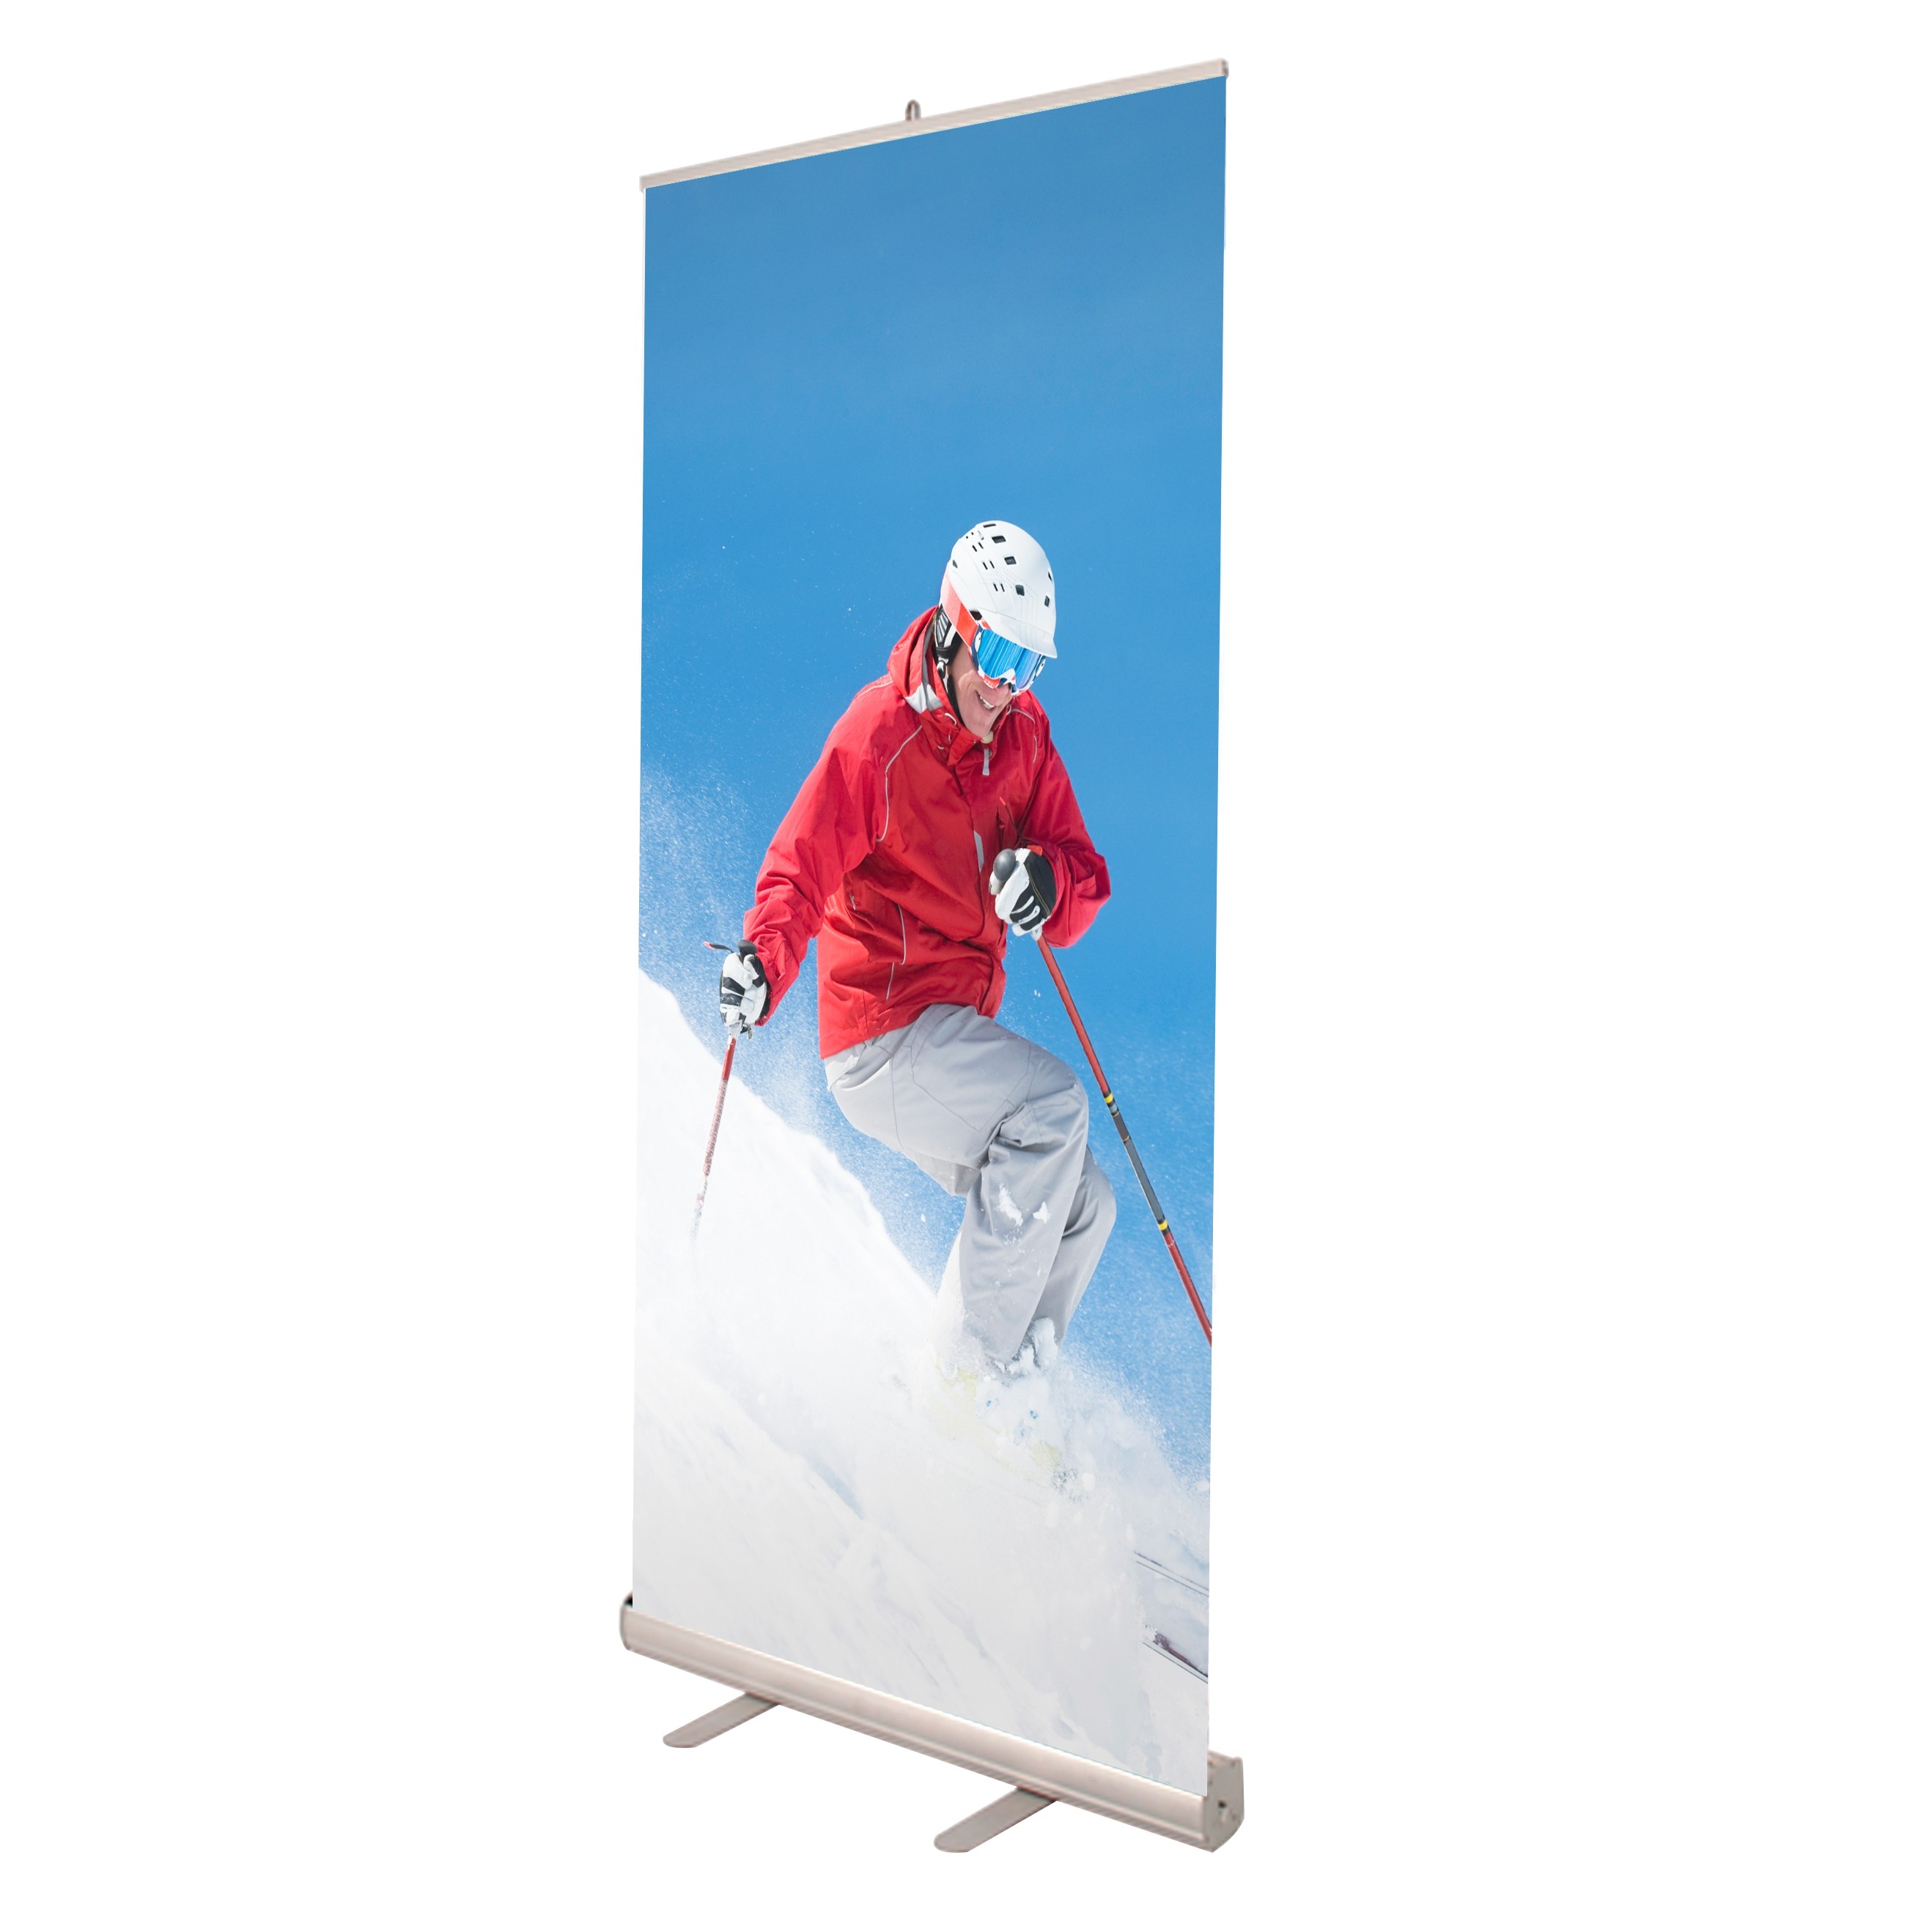 Wholesale Preformed Retractable Banner Stands W 61 * H 160 Cm Size Alloy Material from china suppliers